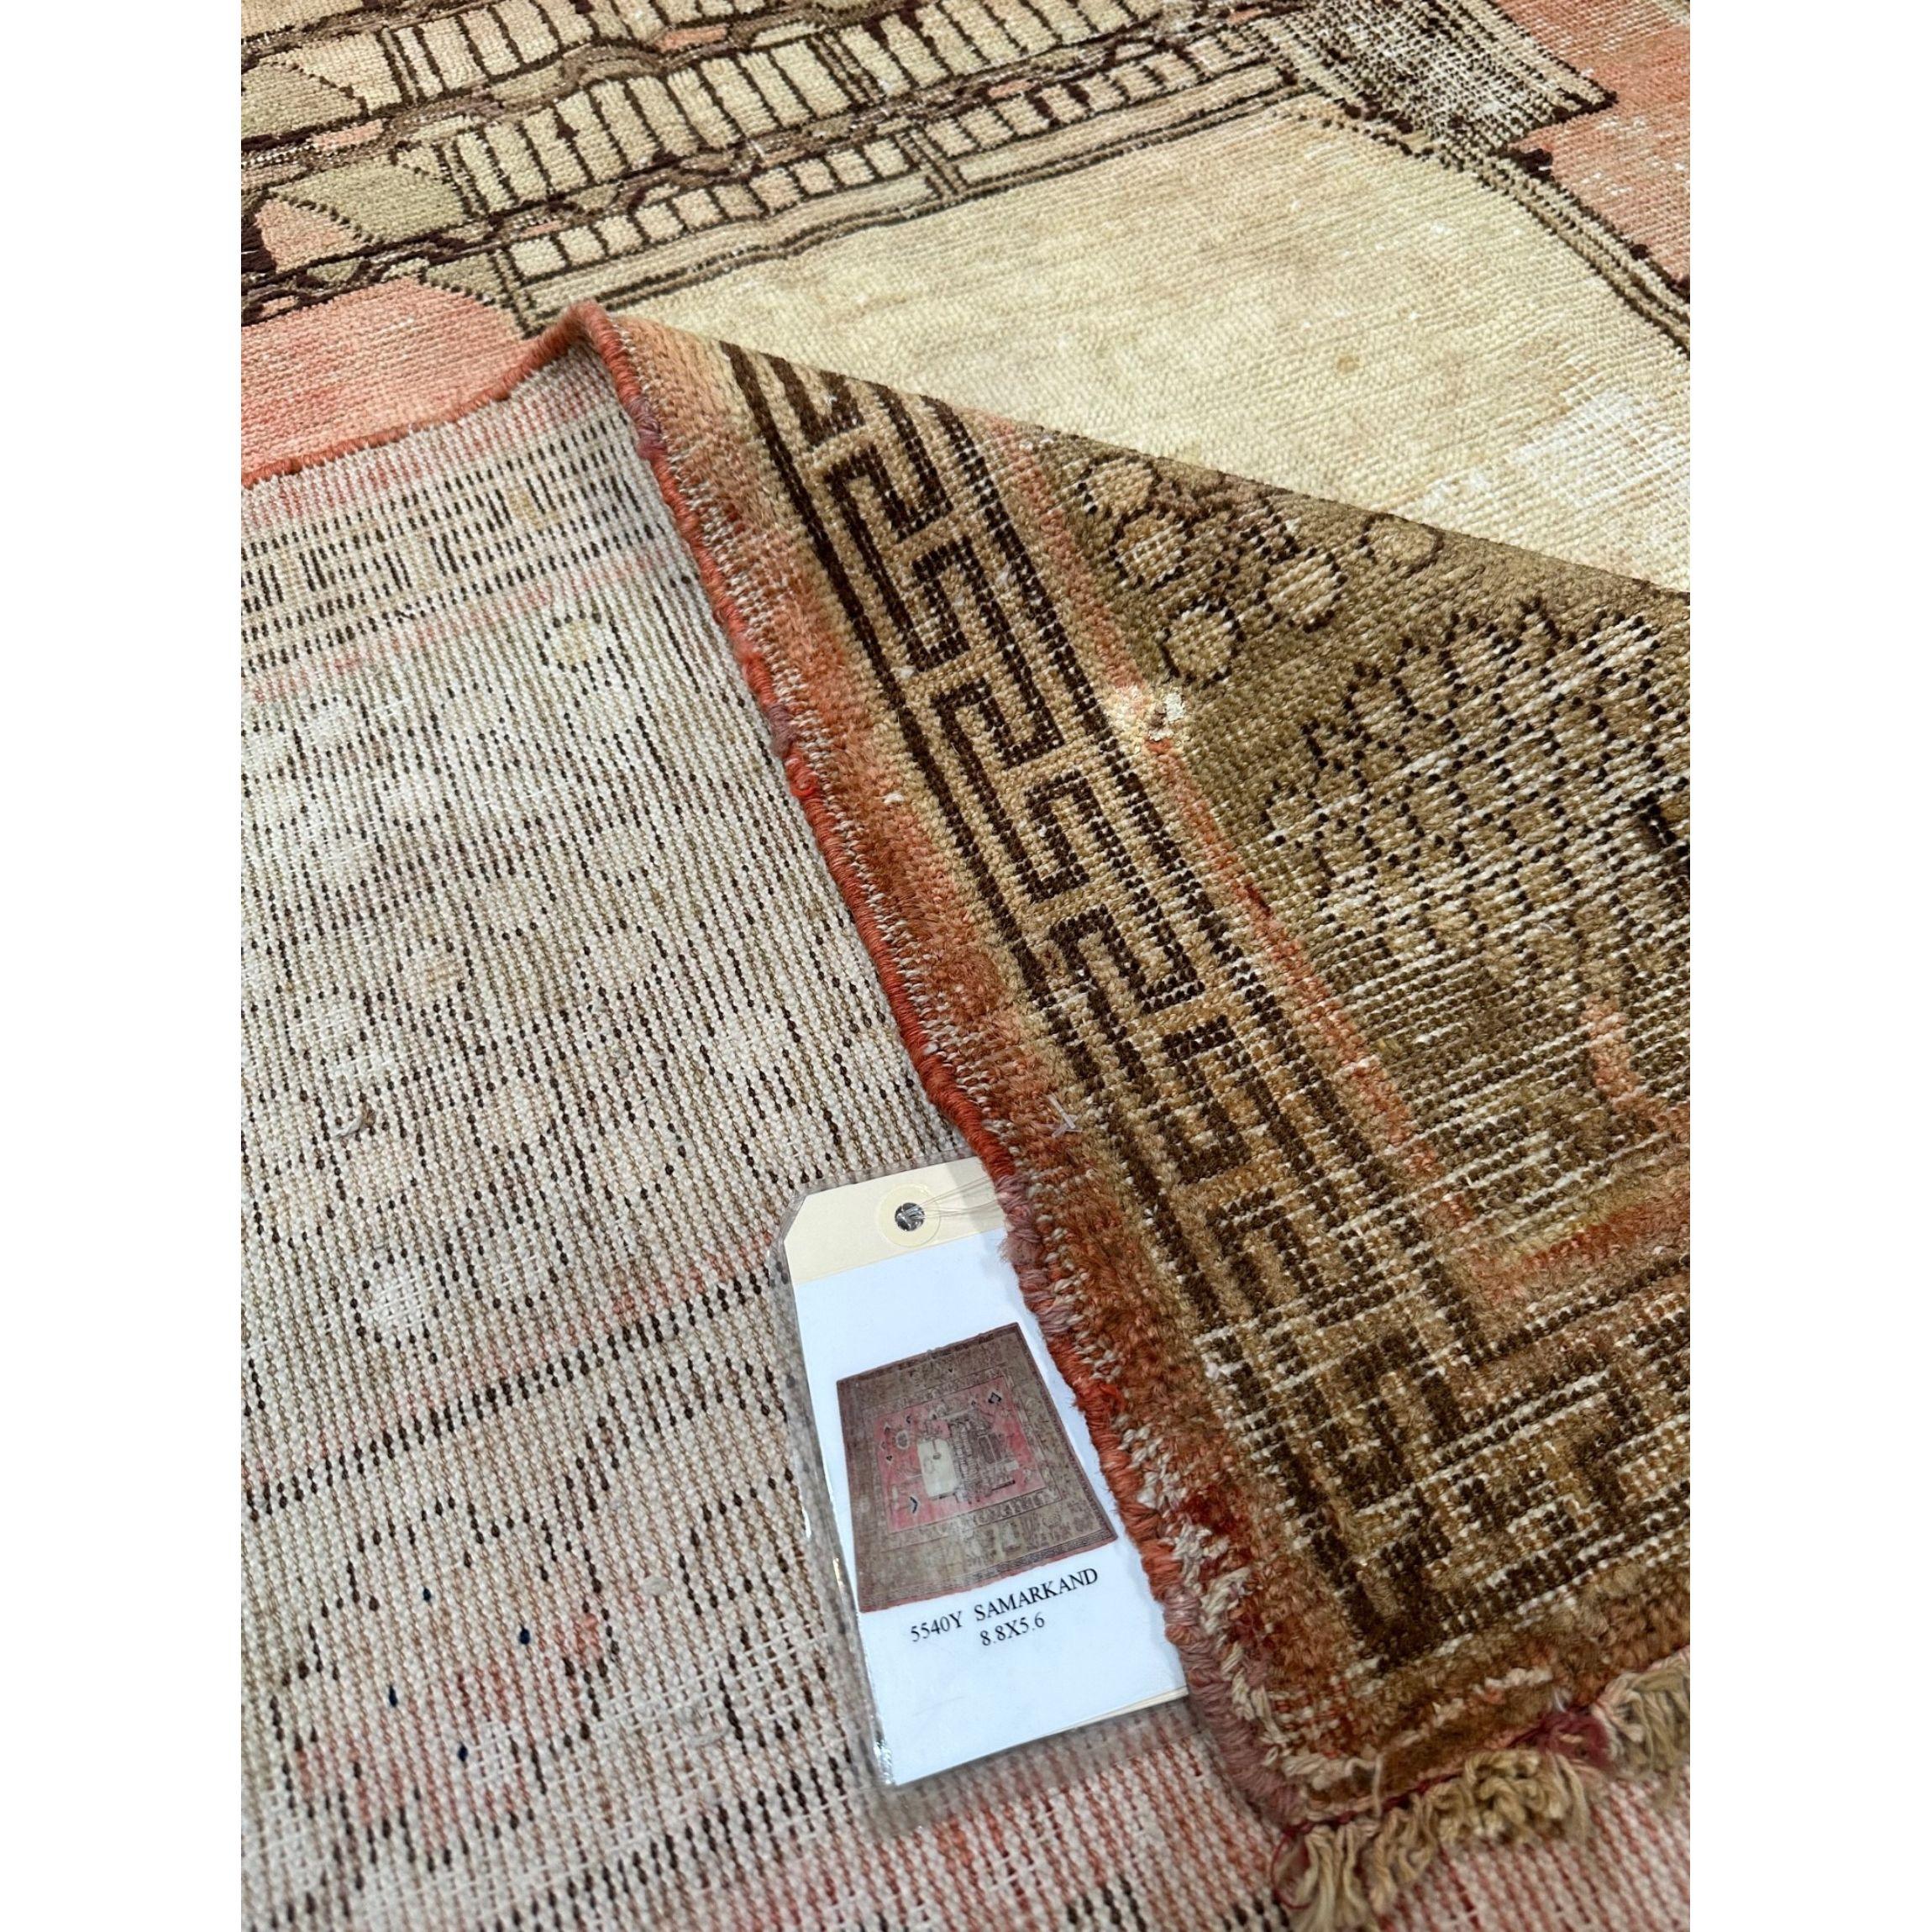 19th-Century Khotan Samarkand In Good Condition For Sale In Los Angeles, US